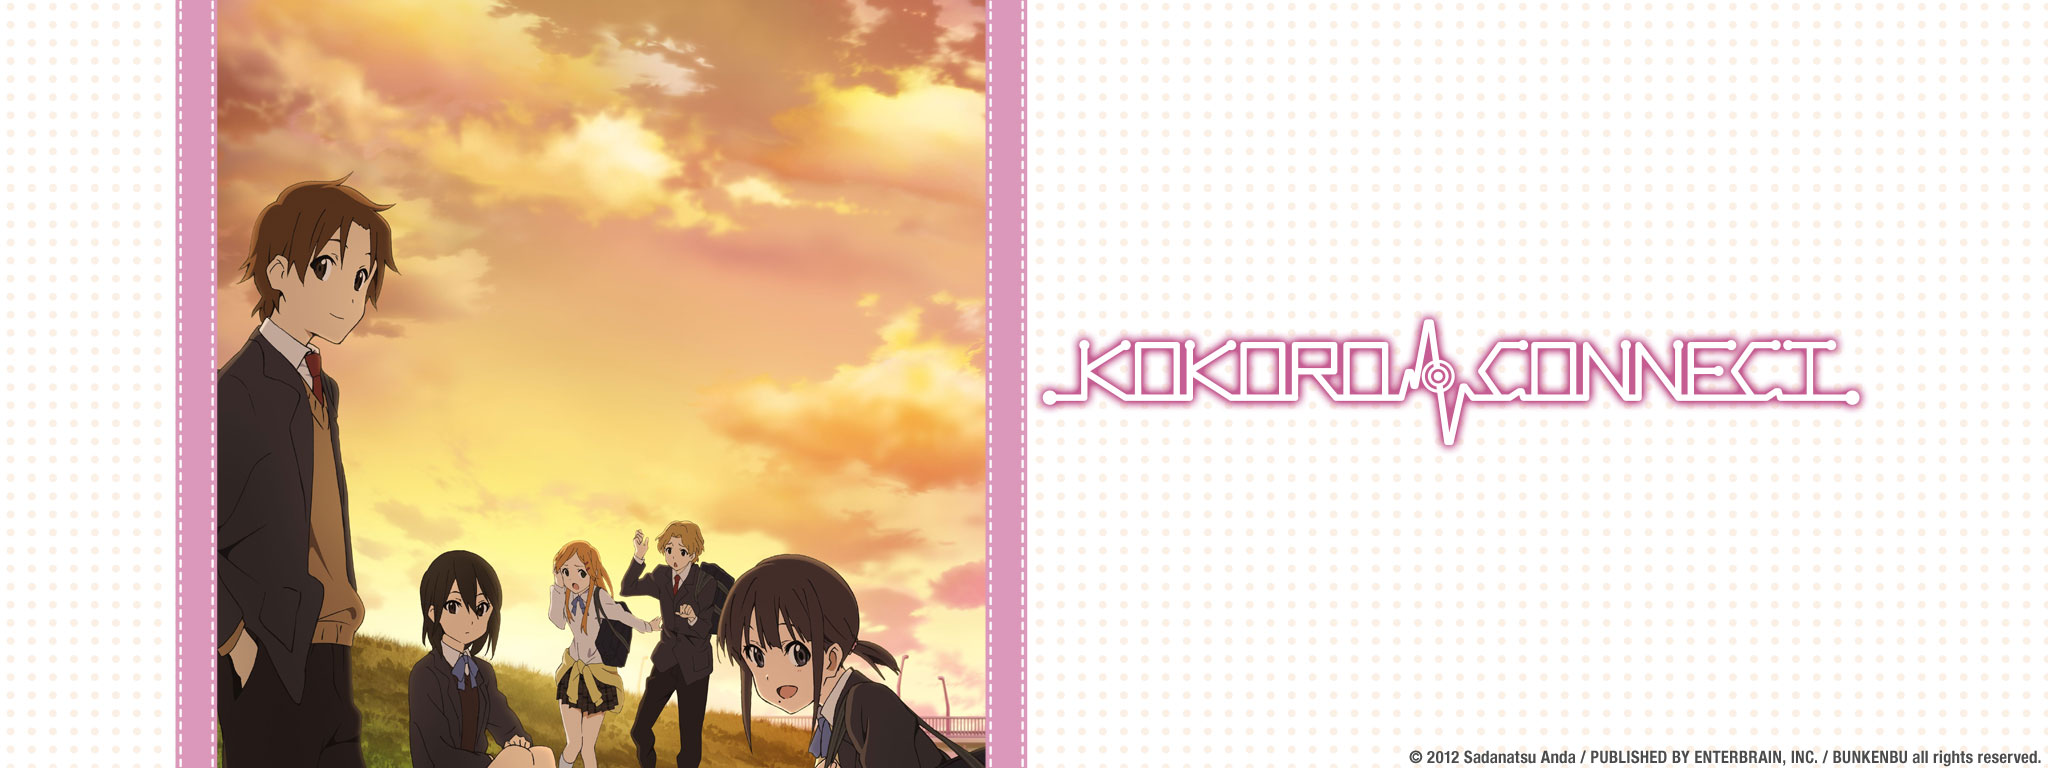 Title Art for Kokoro Connect